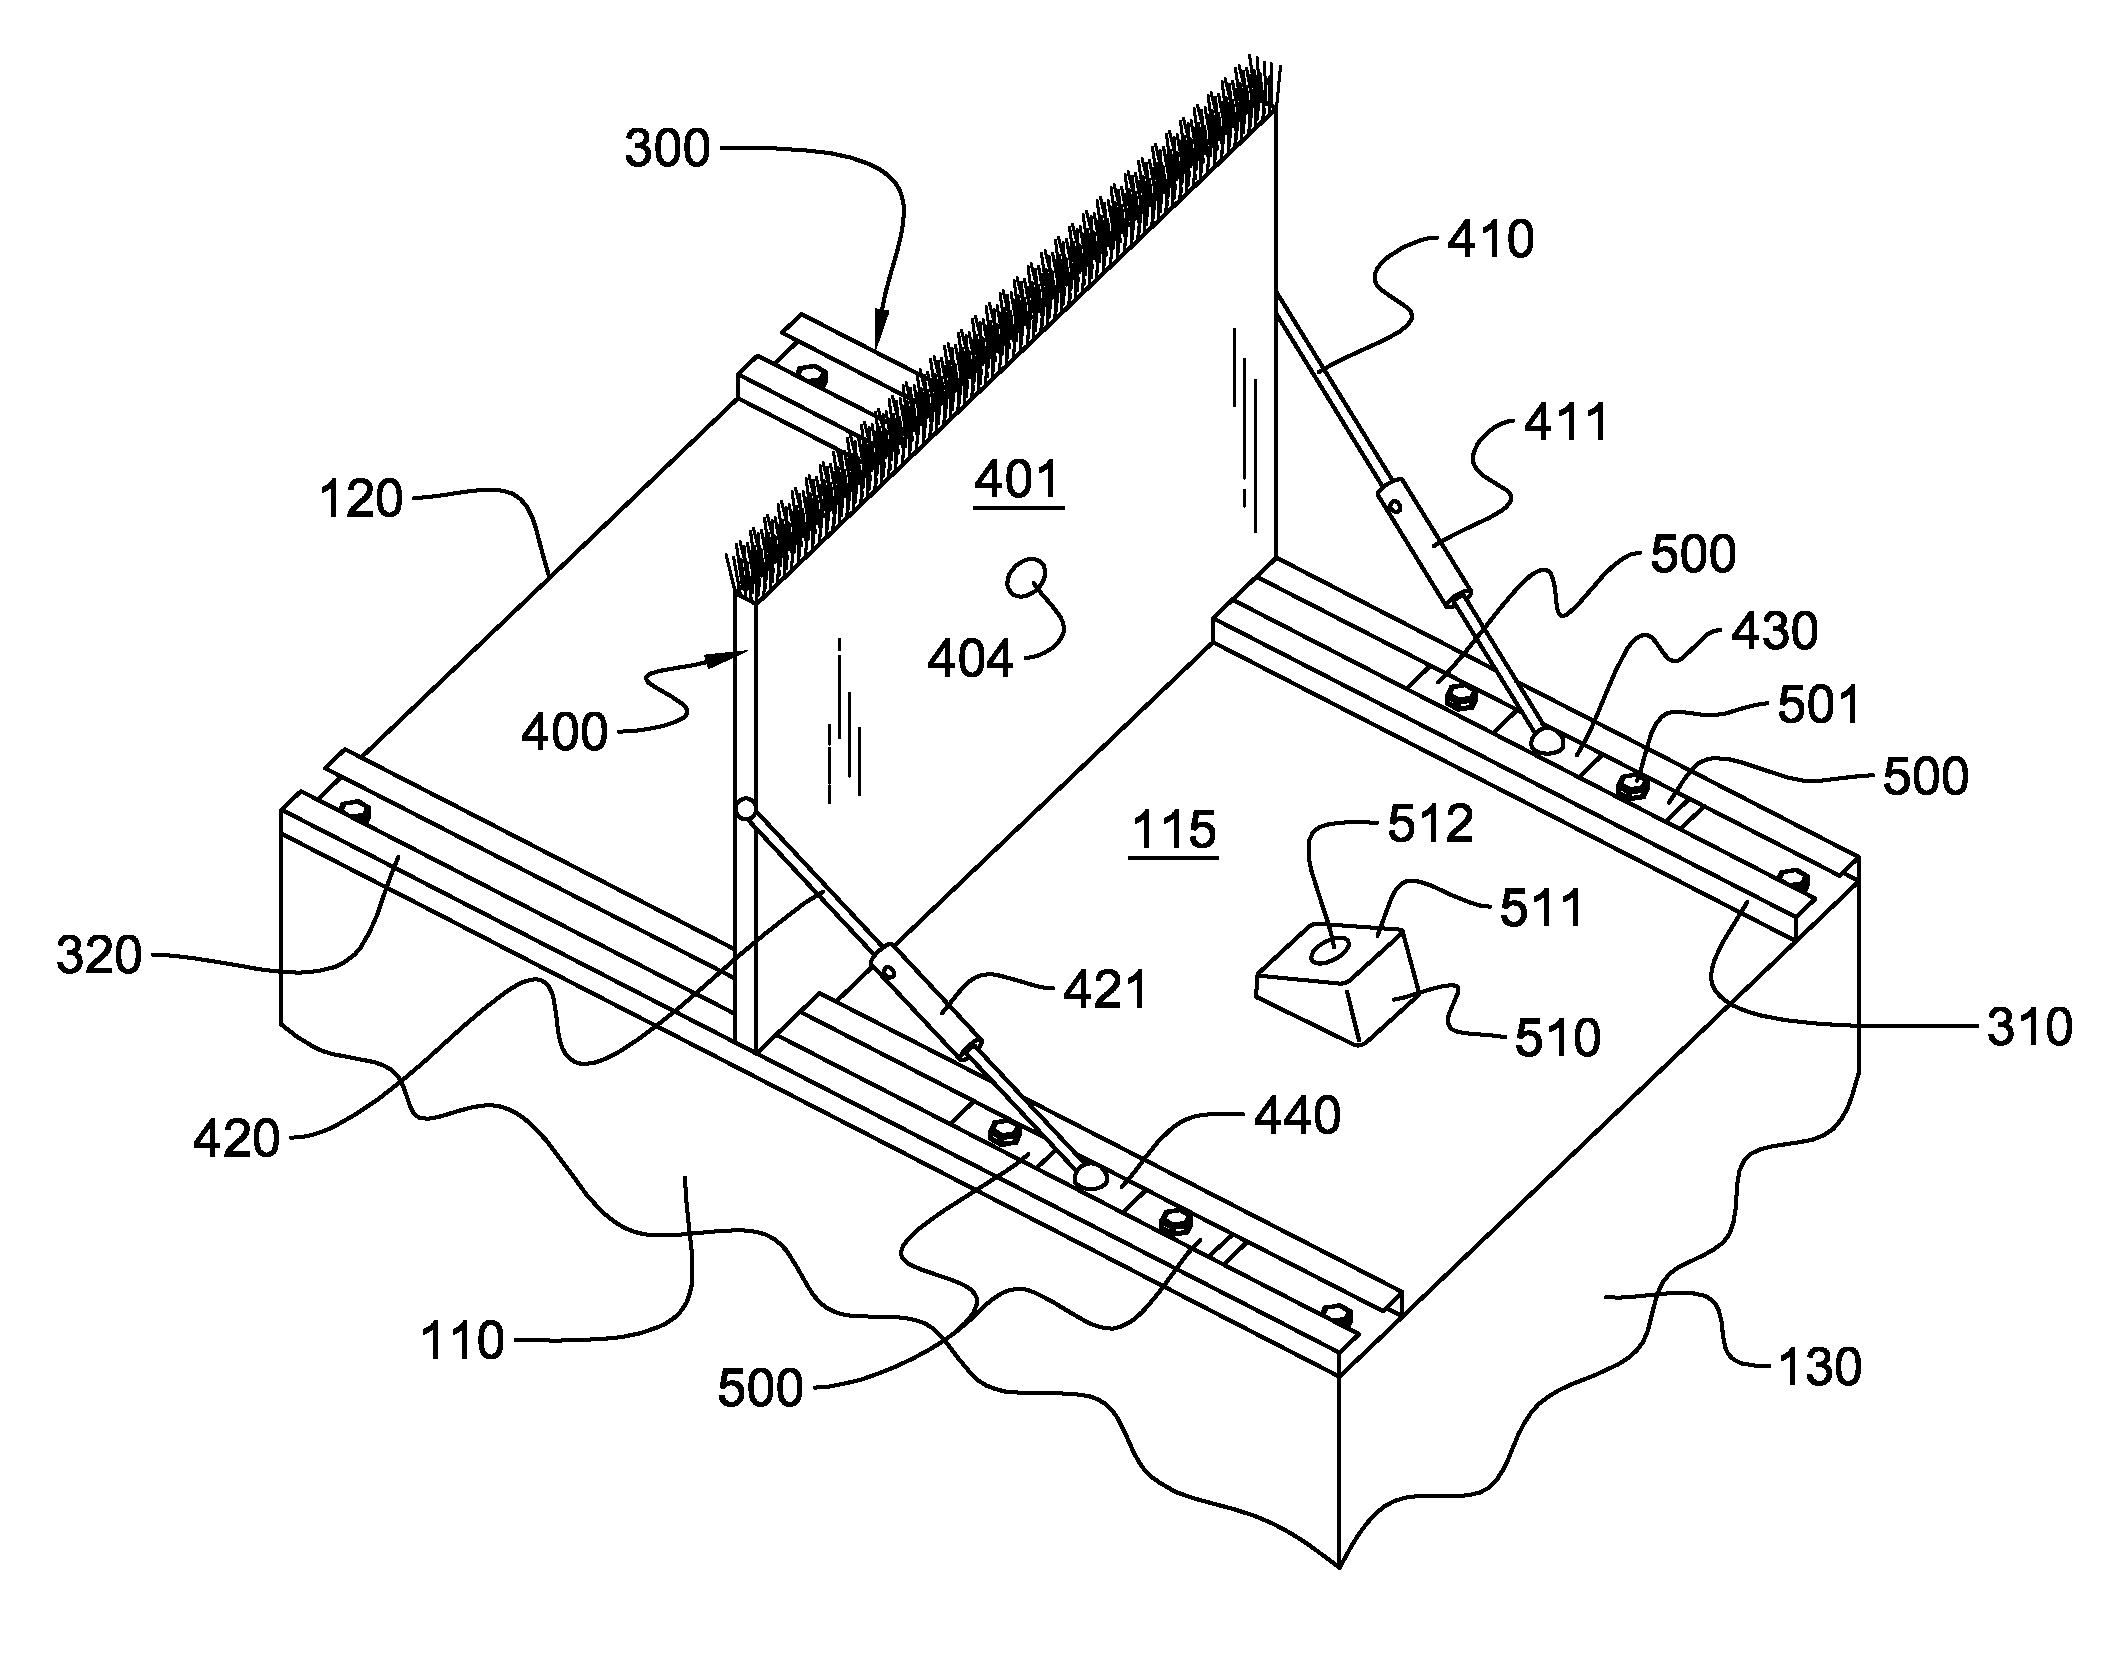 Airflow arresting apparatus and method for facilitating cooling of an electronics rack of a data center